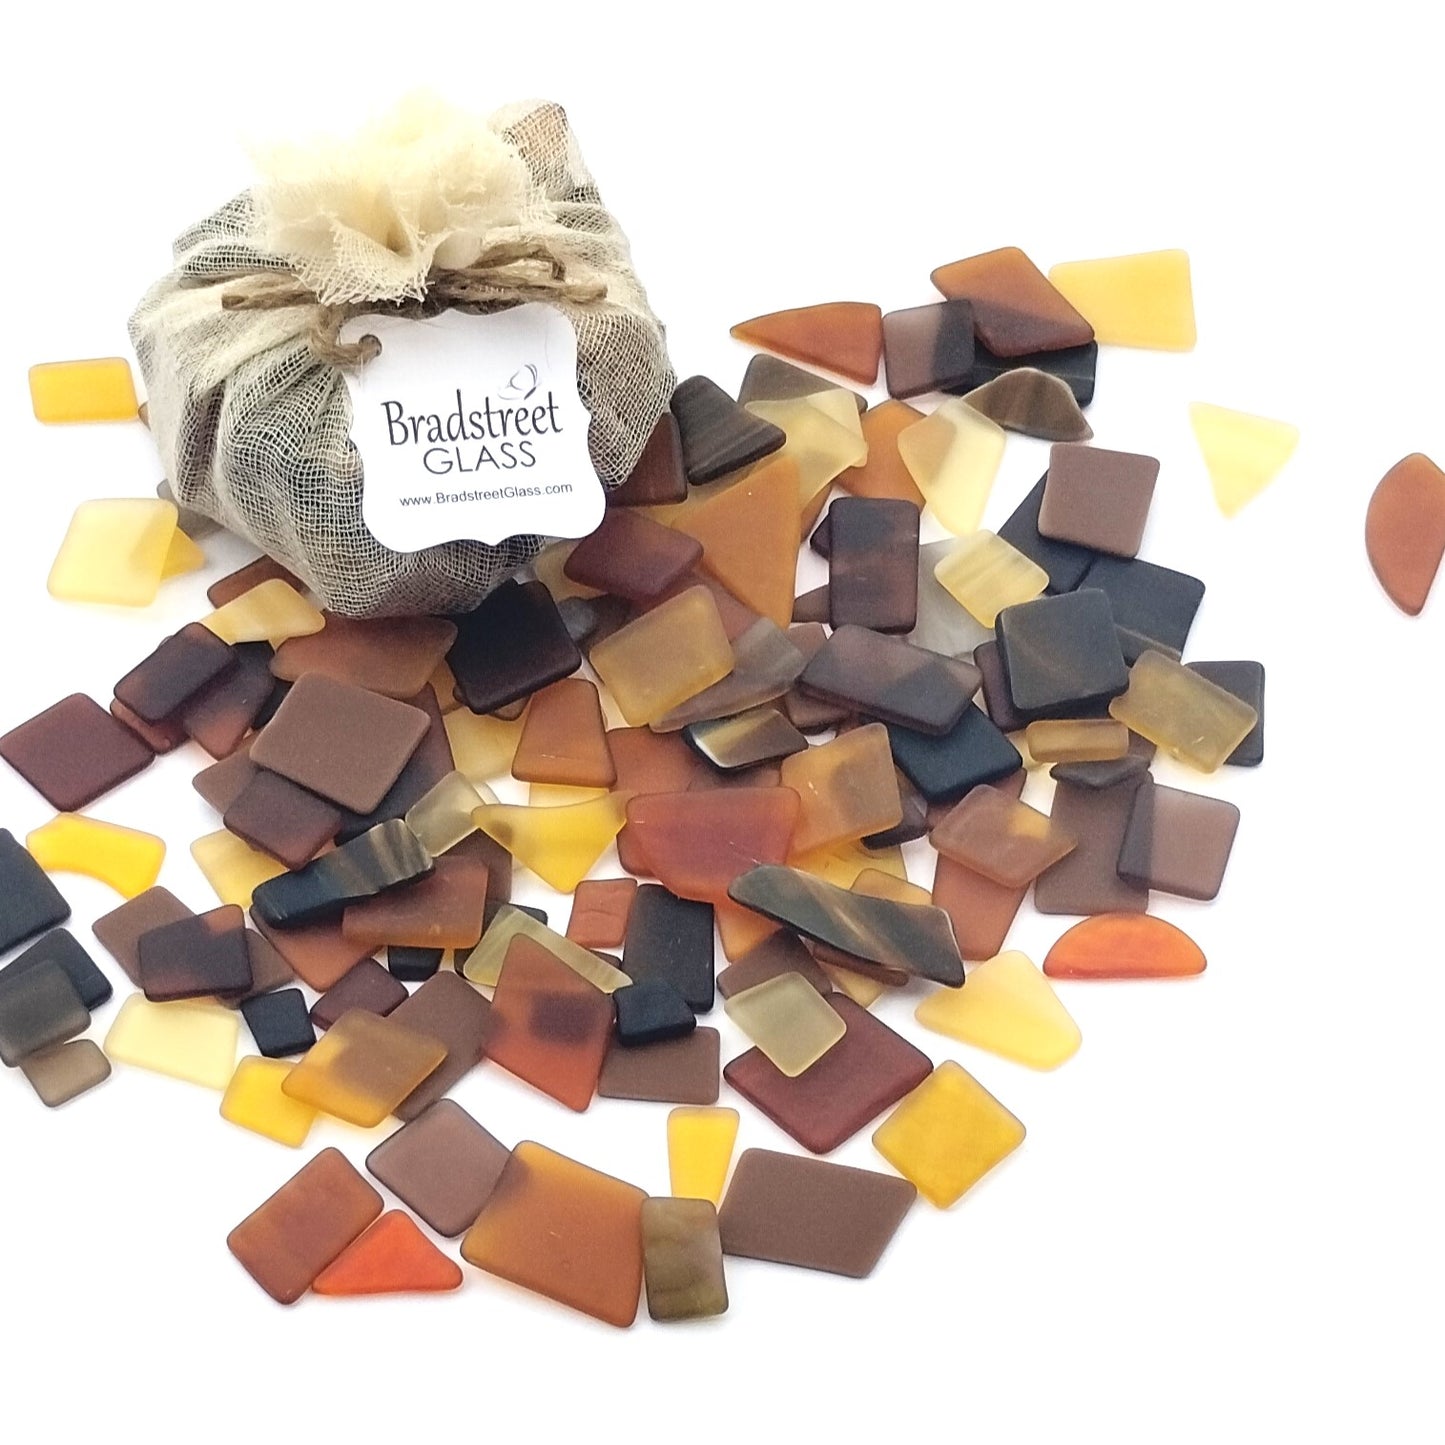 Bradstreet Glass Brown Tumbled Stained Glass 1/2 LB "Sea Glass" Pieces in Shades of Amber Brown